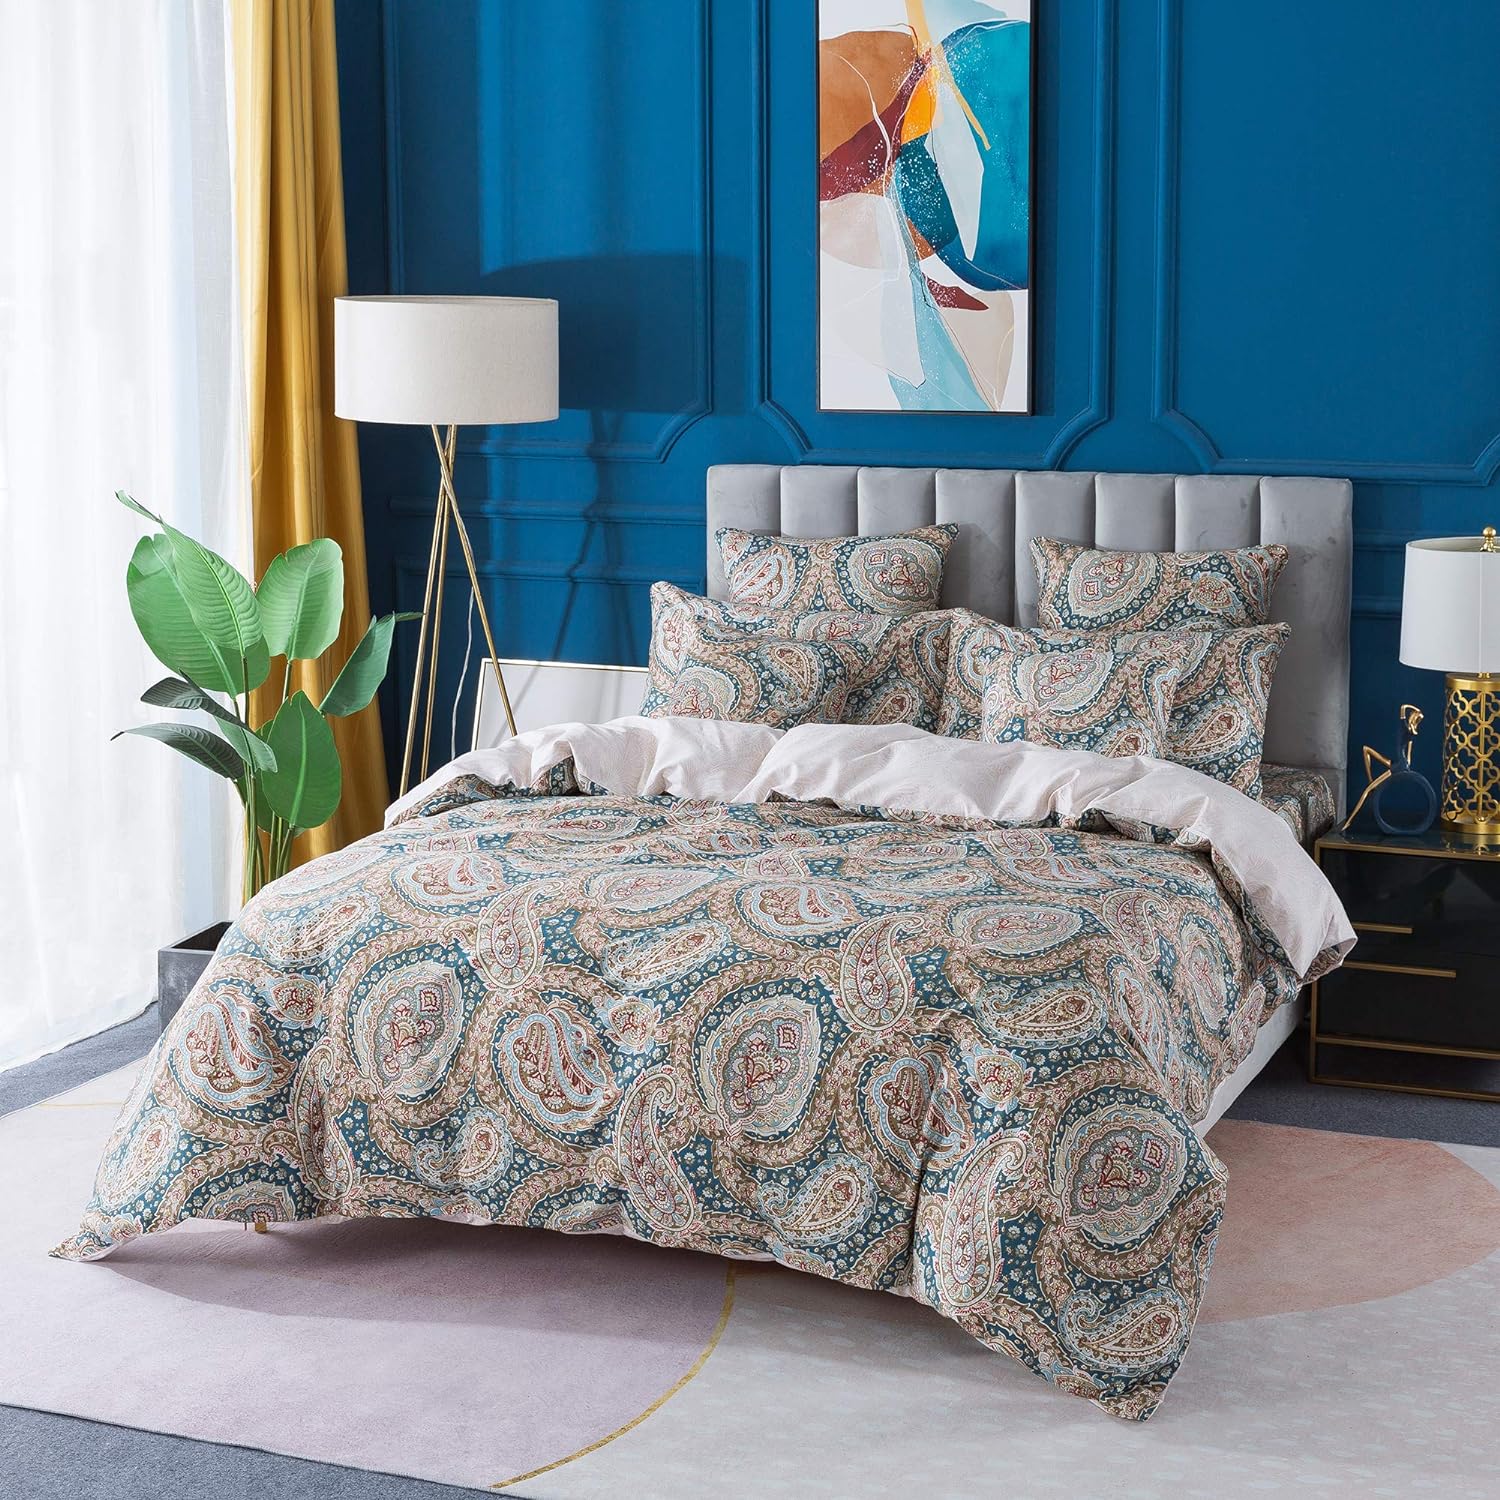 FADFAY Paisley Duvet Cover Set Twin Blue and Beige Reversible Paisley Floral Bedding 100% Cotton Ultra Soft Bedding Set with Hidden Zipper Closure 3 Pieces, 1Duvet Cover & 2Pillowcases, Twin Size